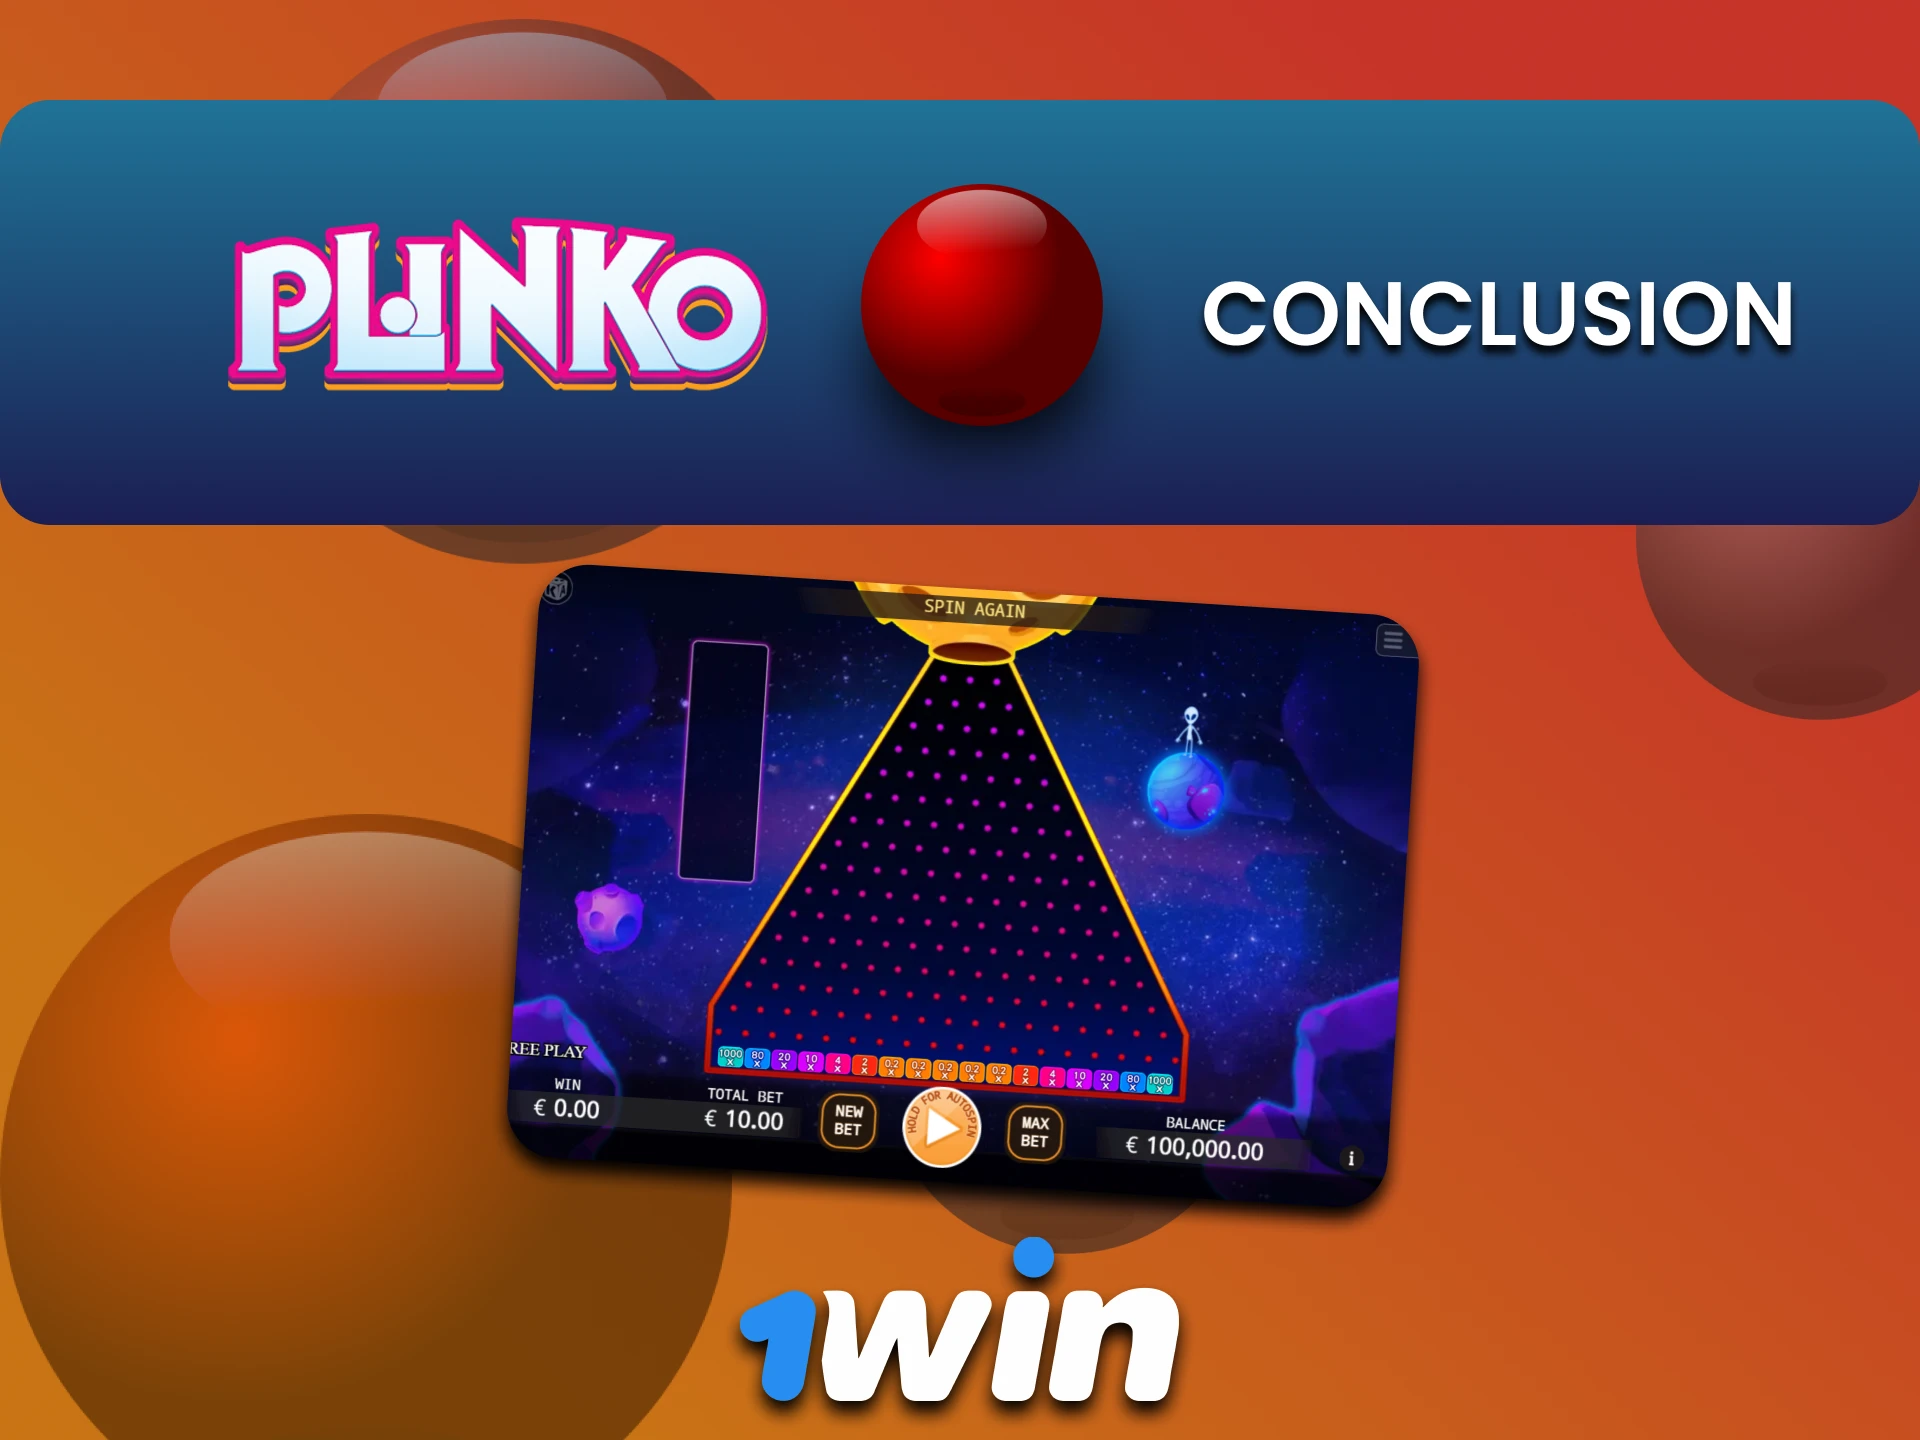 1win is ideal for playing Plinko.